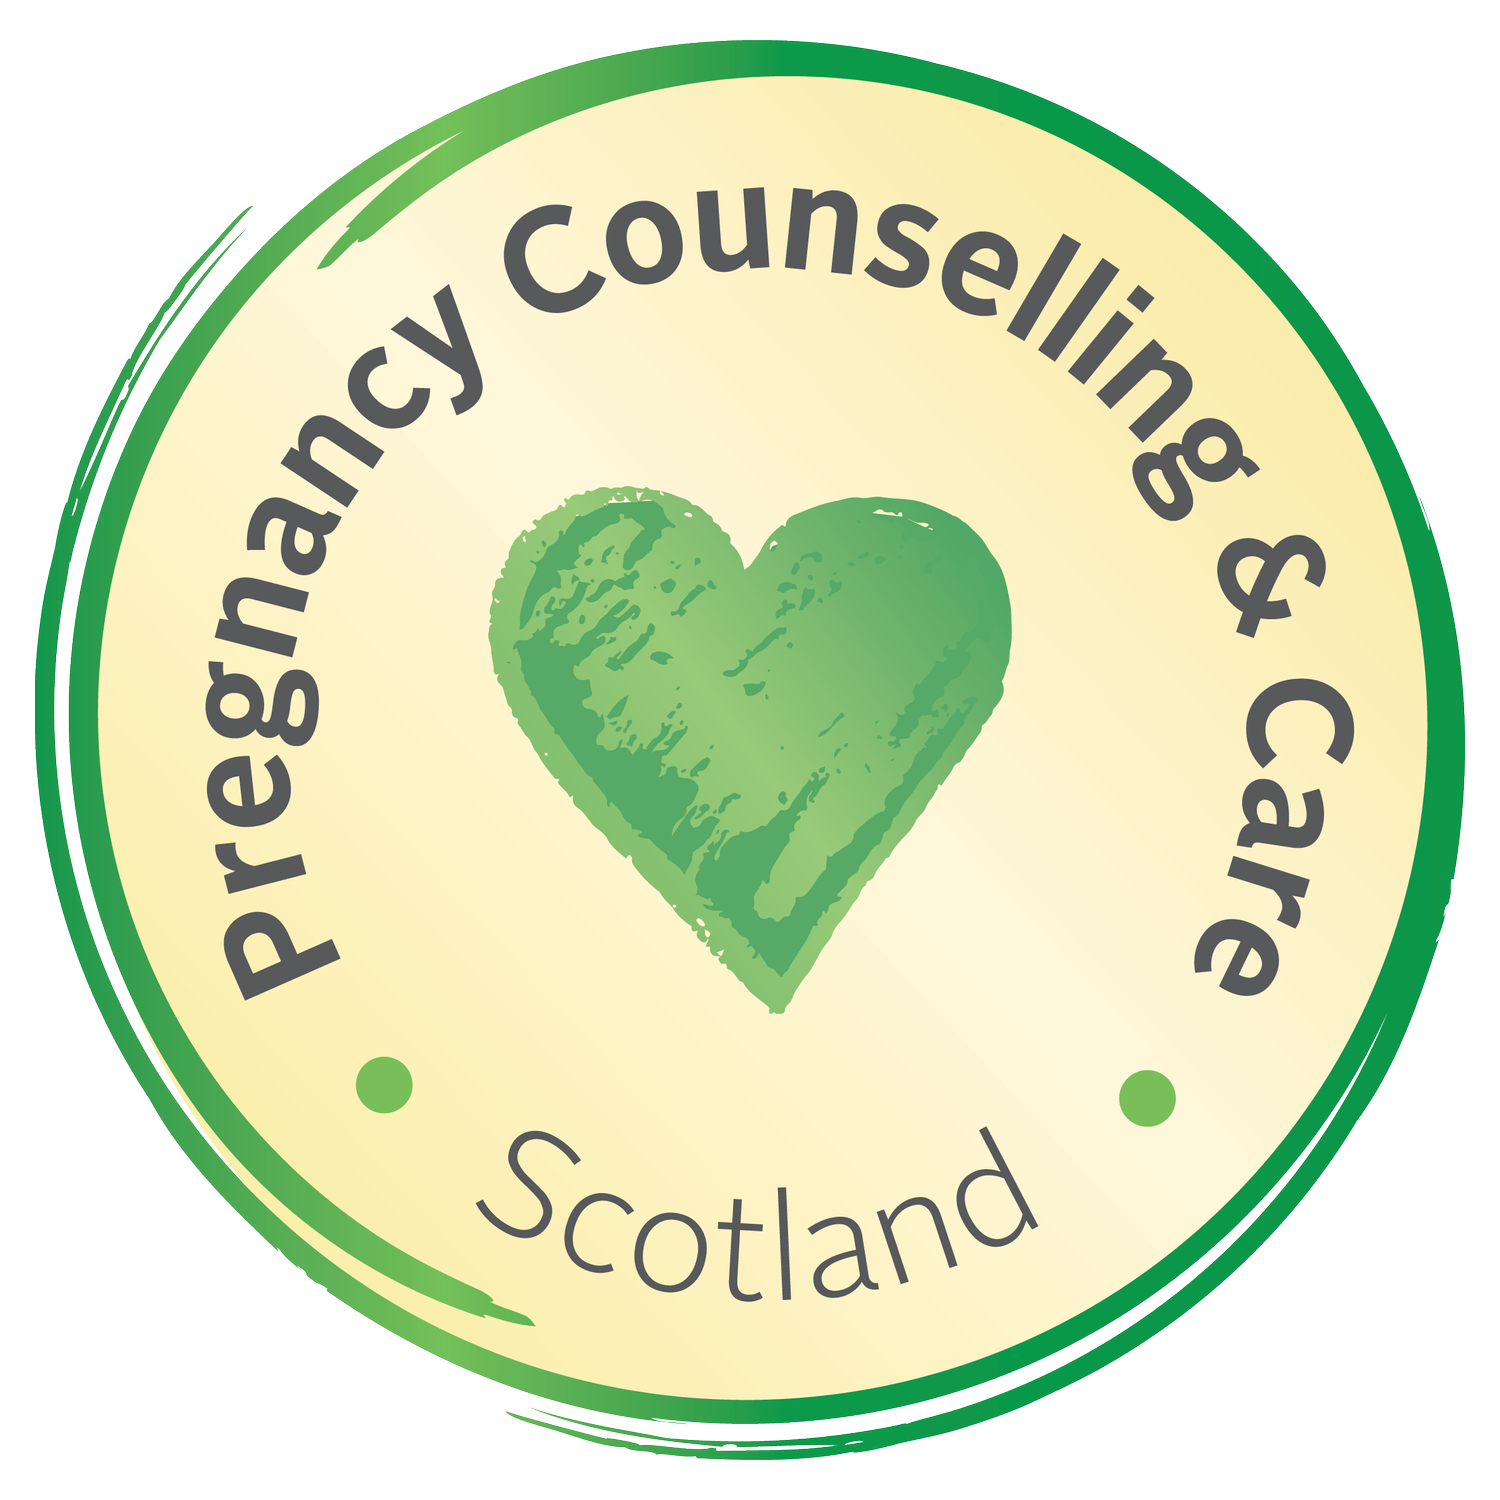 Pregnancy Care and Counselling (Scotland)